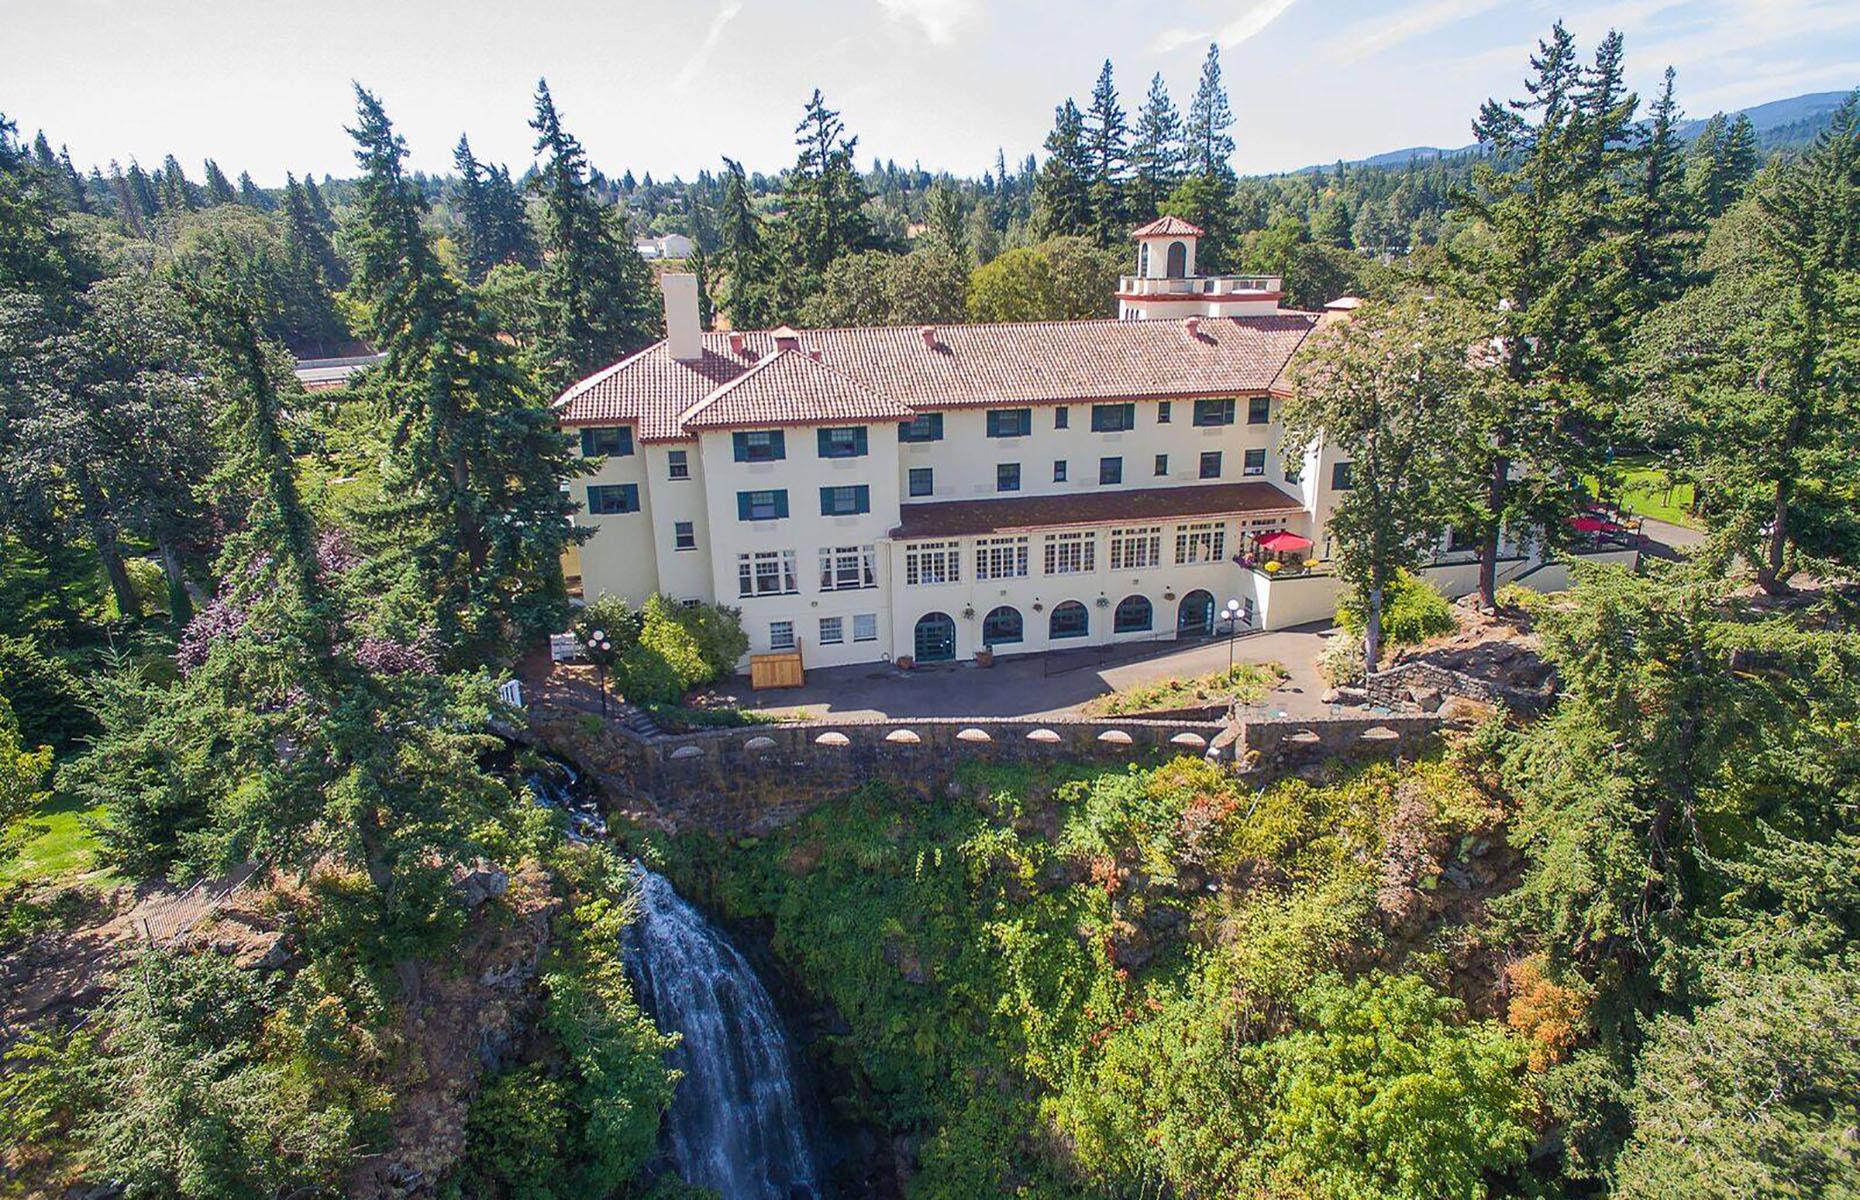 <p>Nearly a century old, the <a href="https://www.booking.com/hotel/us/columbia-gorge-hotel.en-gb.html?aid=1280739" rel="nofollow” target=">Columbia Gorge Hotel & Spa</a> undoubtedly benefits from a stunning location and has hosted a fair share of superstar guests, including Burt Reynolds and Shirley Temple as well as US presidents Calvin Coolidge and Franklin D. Roosevelt. It's also haunted – guests have reported seeing a woman in white who is believed to have taken her own life by jumping off a hotel balcony although no proof has been found to suggest this is true. Others say they've witnessed a child either playing or sitting on the ground near the site of a former swimming pool.</p>